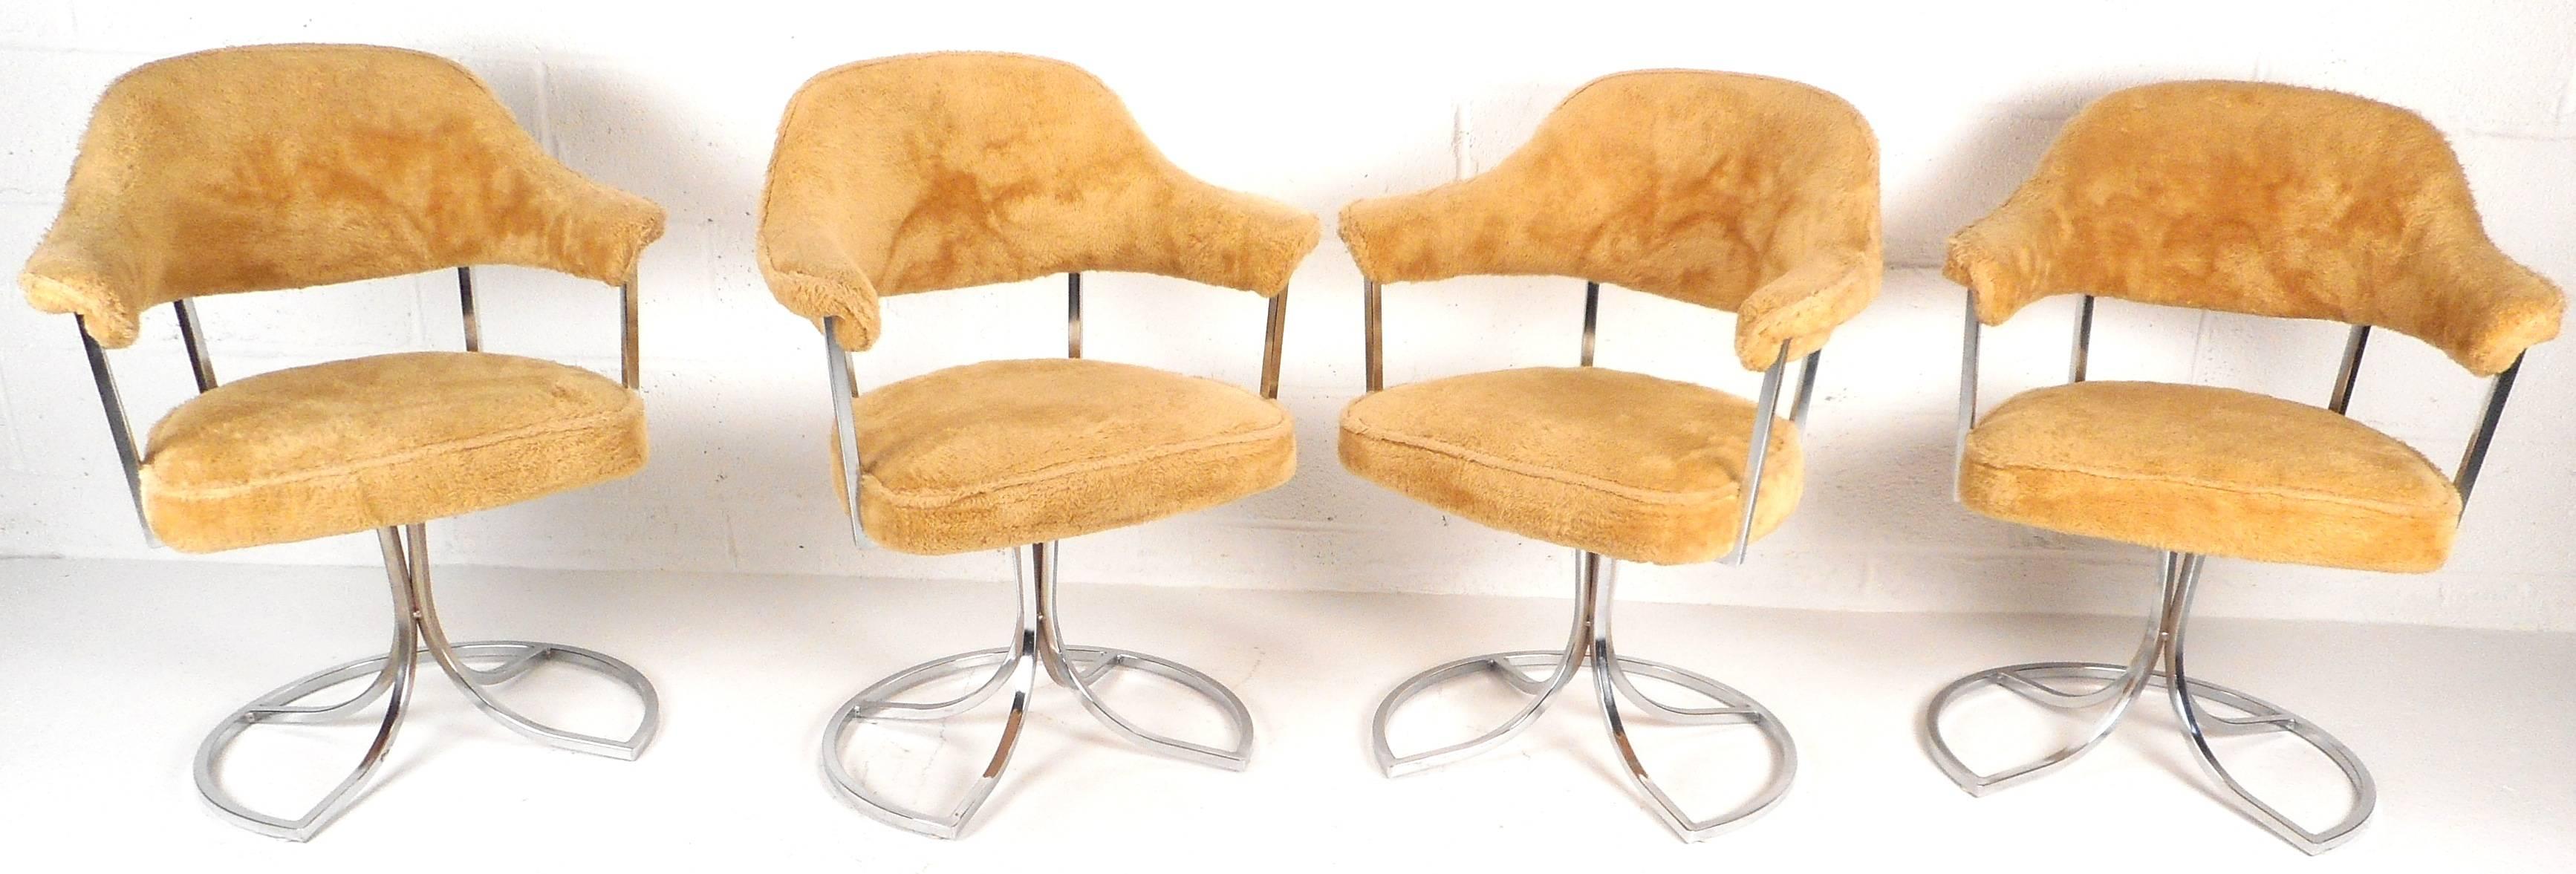 Stunning Mid-Century Modern set of four tulip chairs by Cal-Style Furniture. Unique sculpted chrome swivel base, vintage gold fabric and comfortable barrel back seats make this vintage set of kitchen or occasional chairs a stylish addition to any